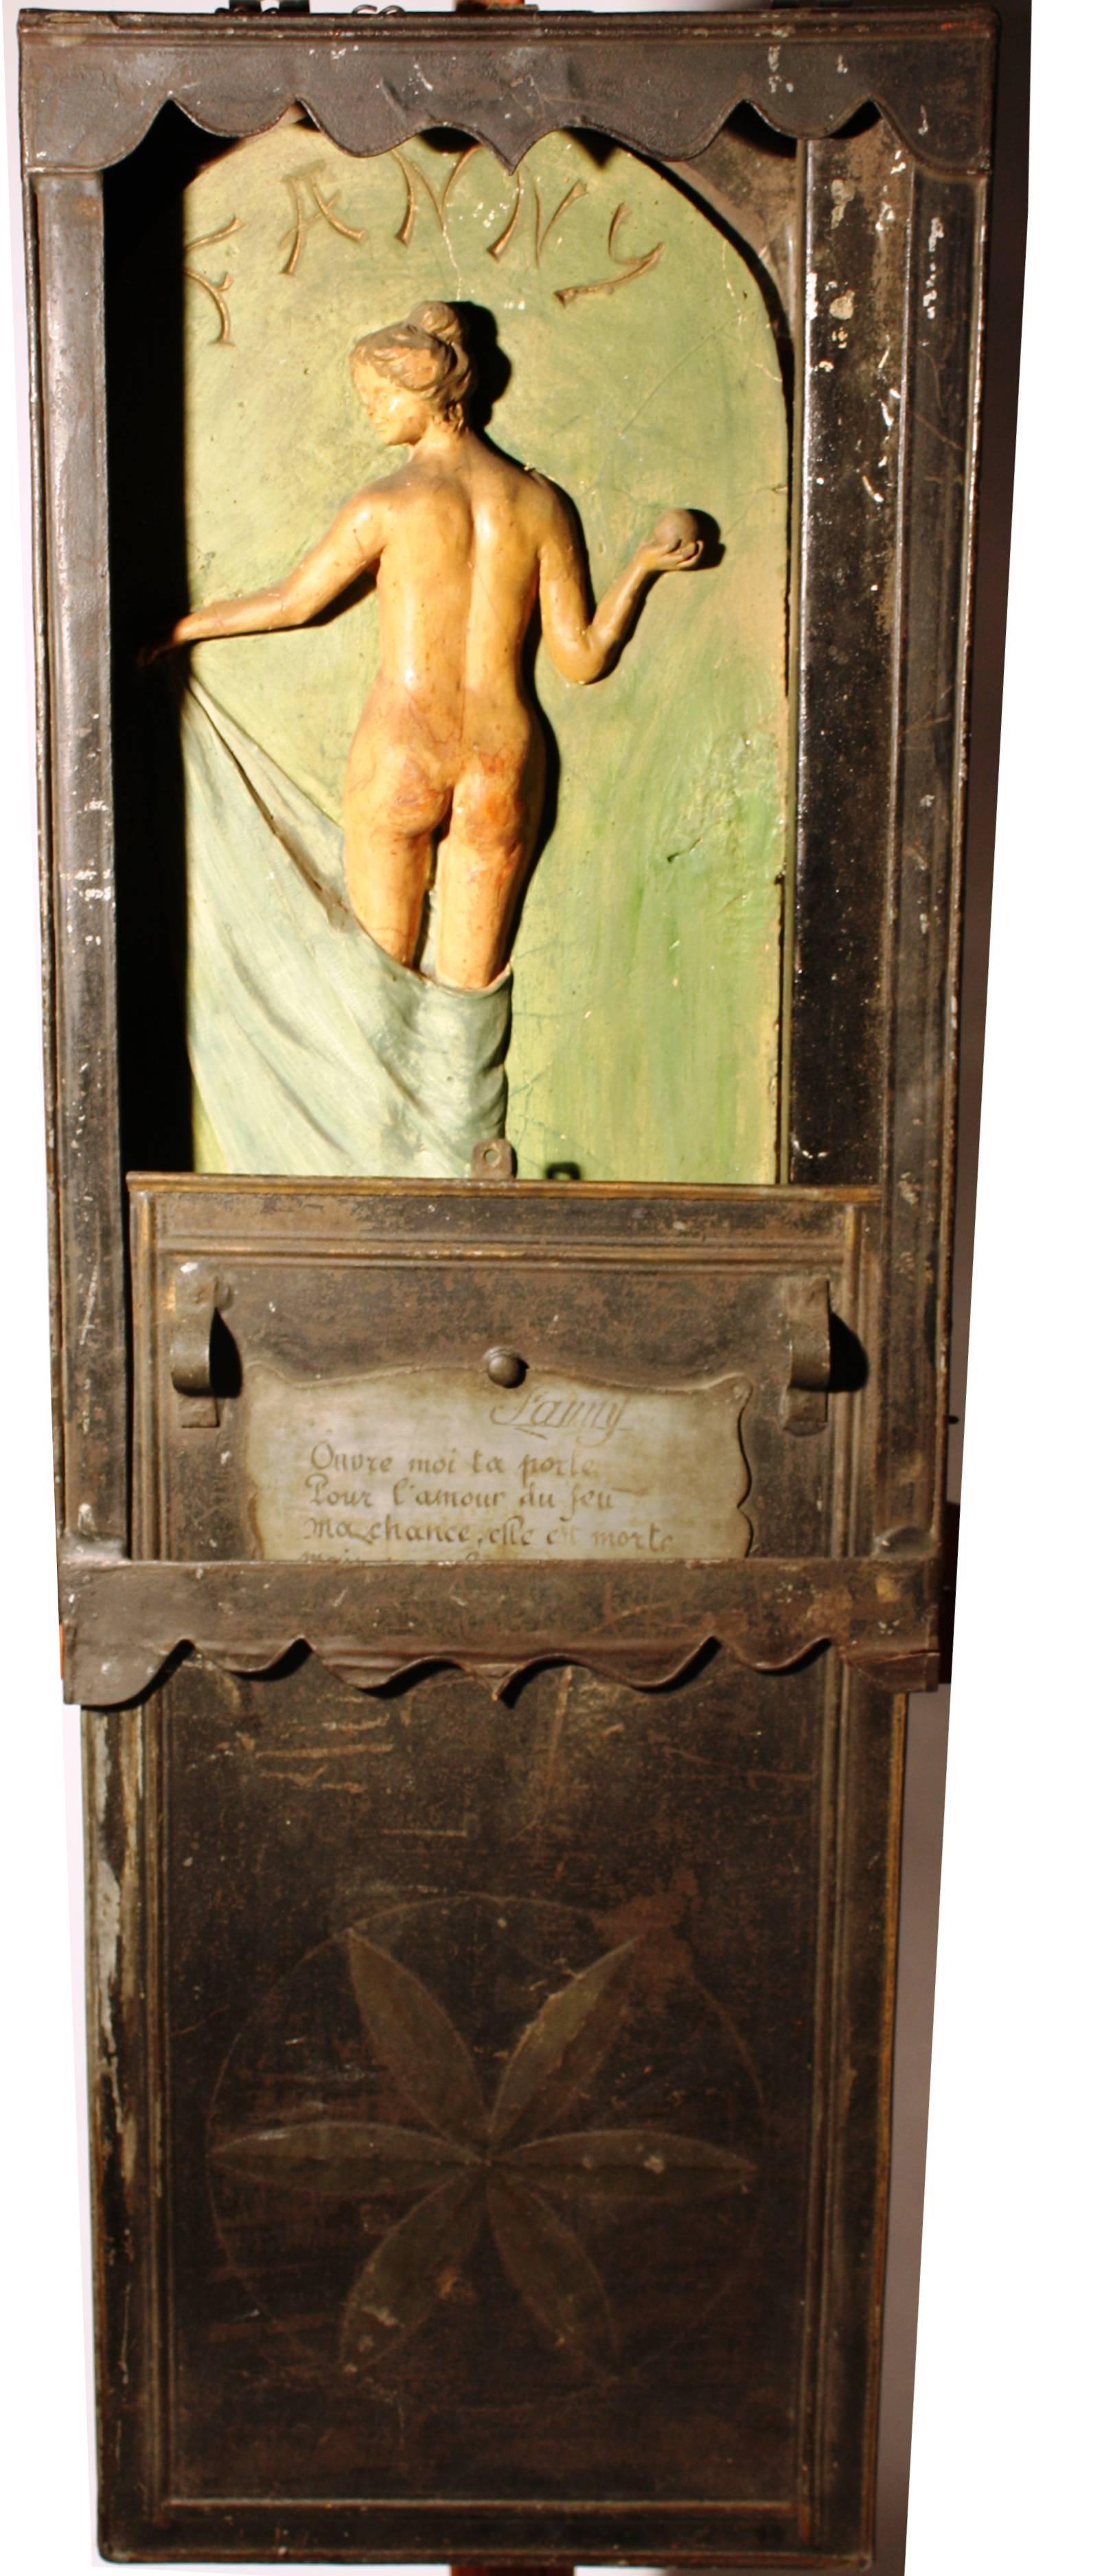 A rare 19th century Petanque (boule) "Fanny Box" from Provence, in tin with a painted composition figure behind a sliding panel. The front of the box has a metal plaque with a poem which can be loosely interpreted as "Open my door for